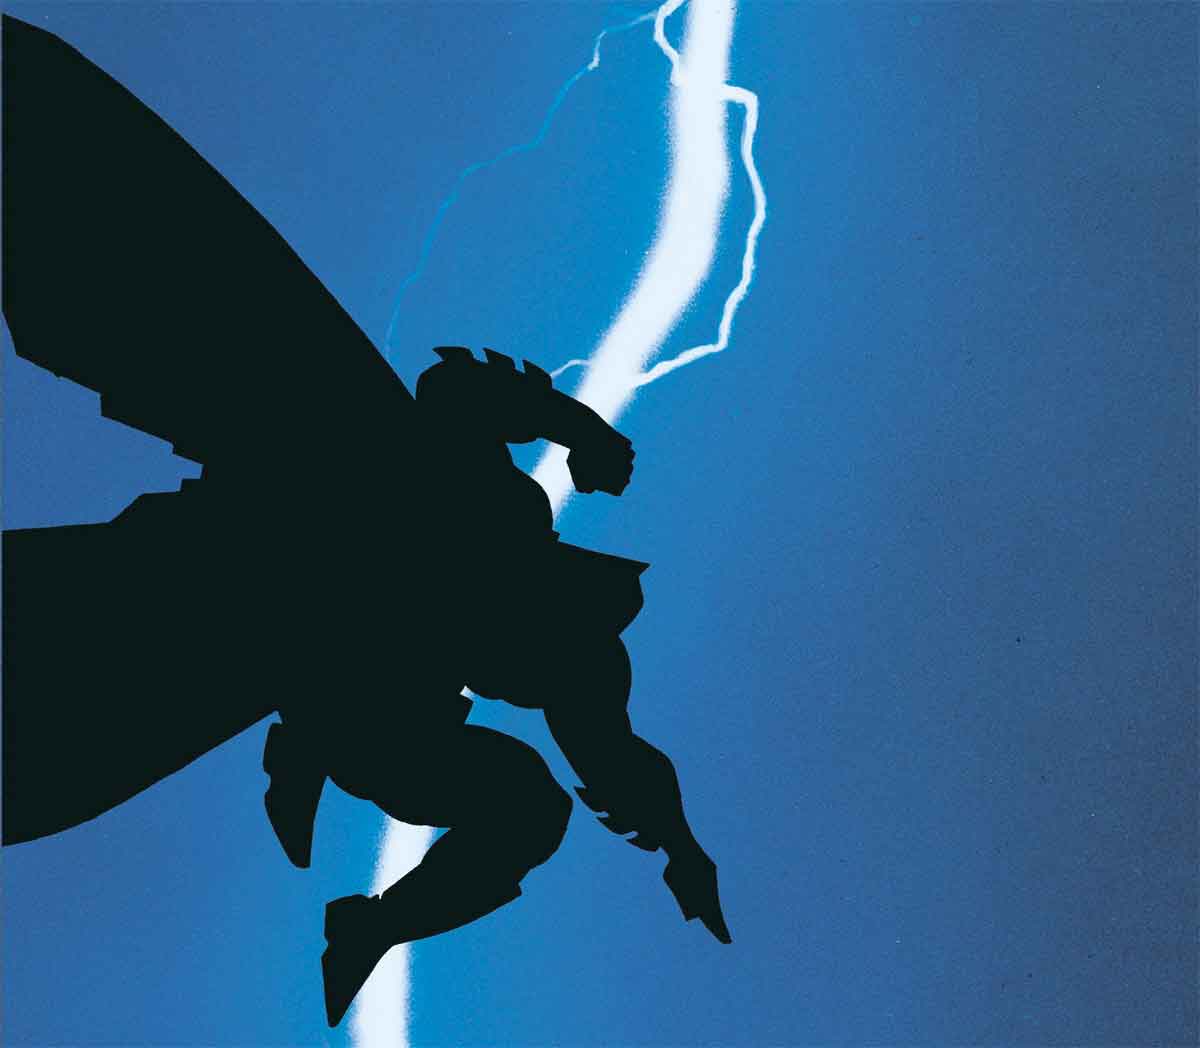 This would be the movie of Batman: The Return of the Dark Knight